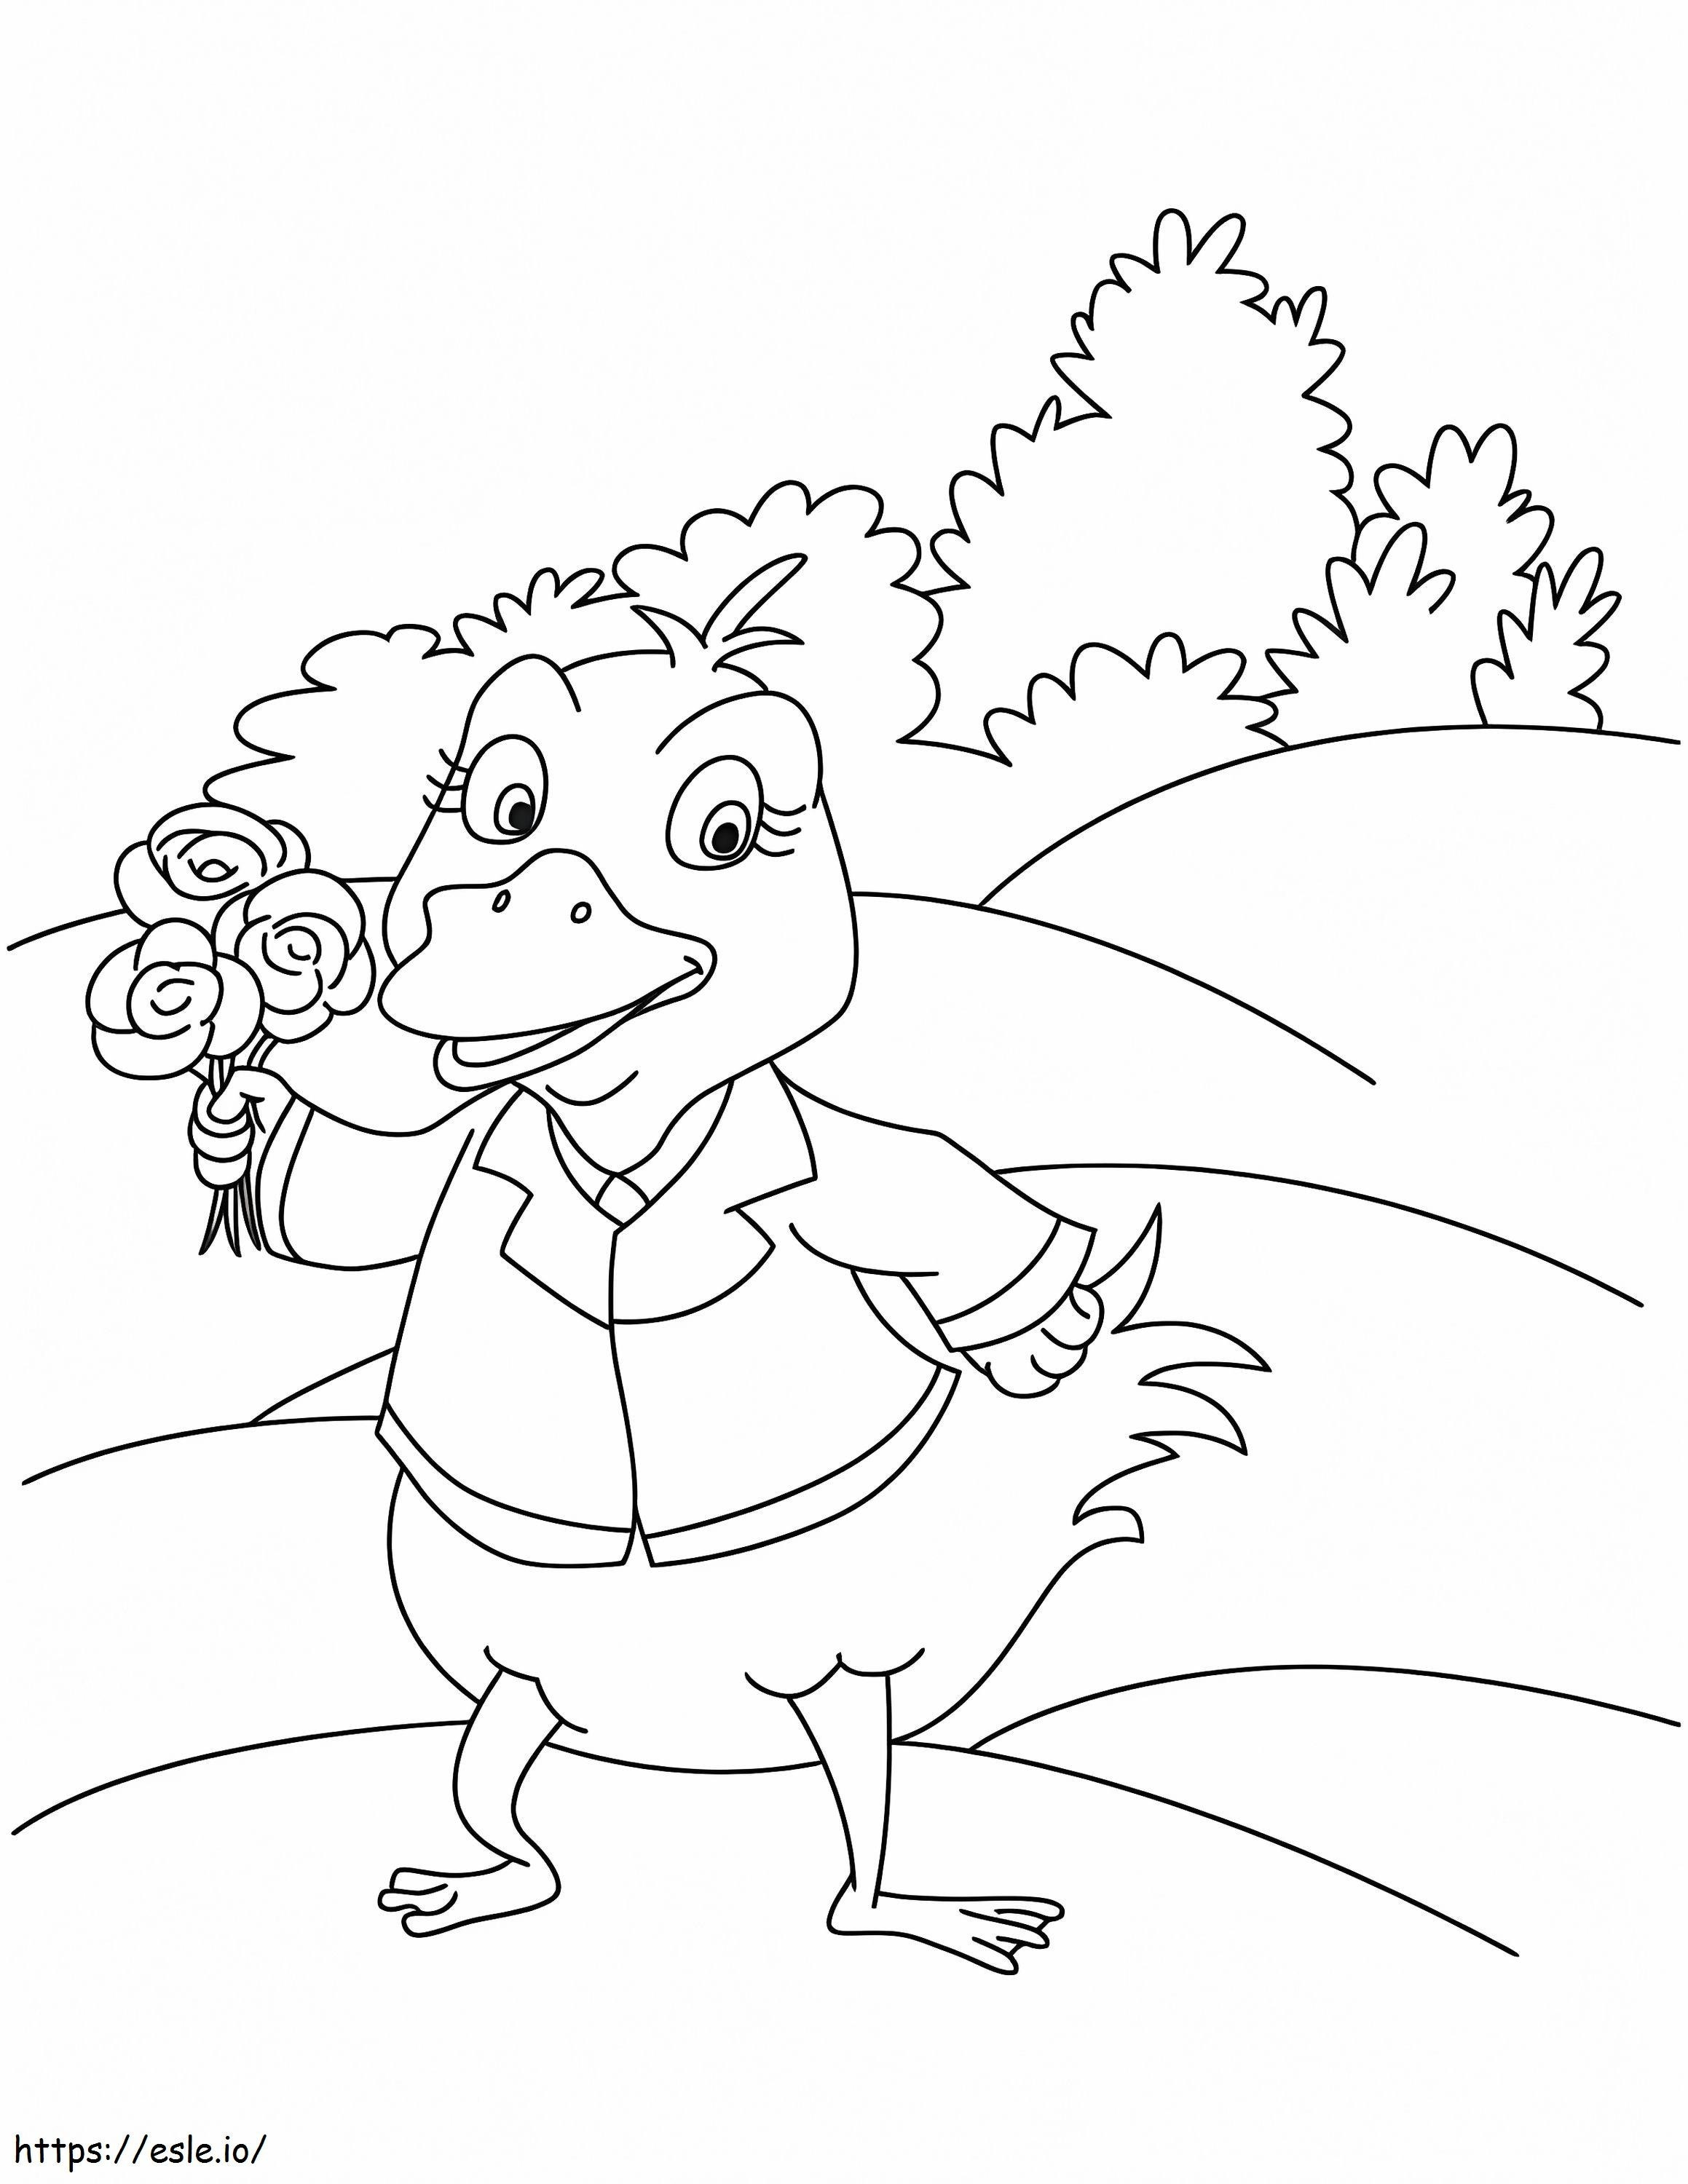 Happy Duck With Gardenia Flower coloring page